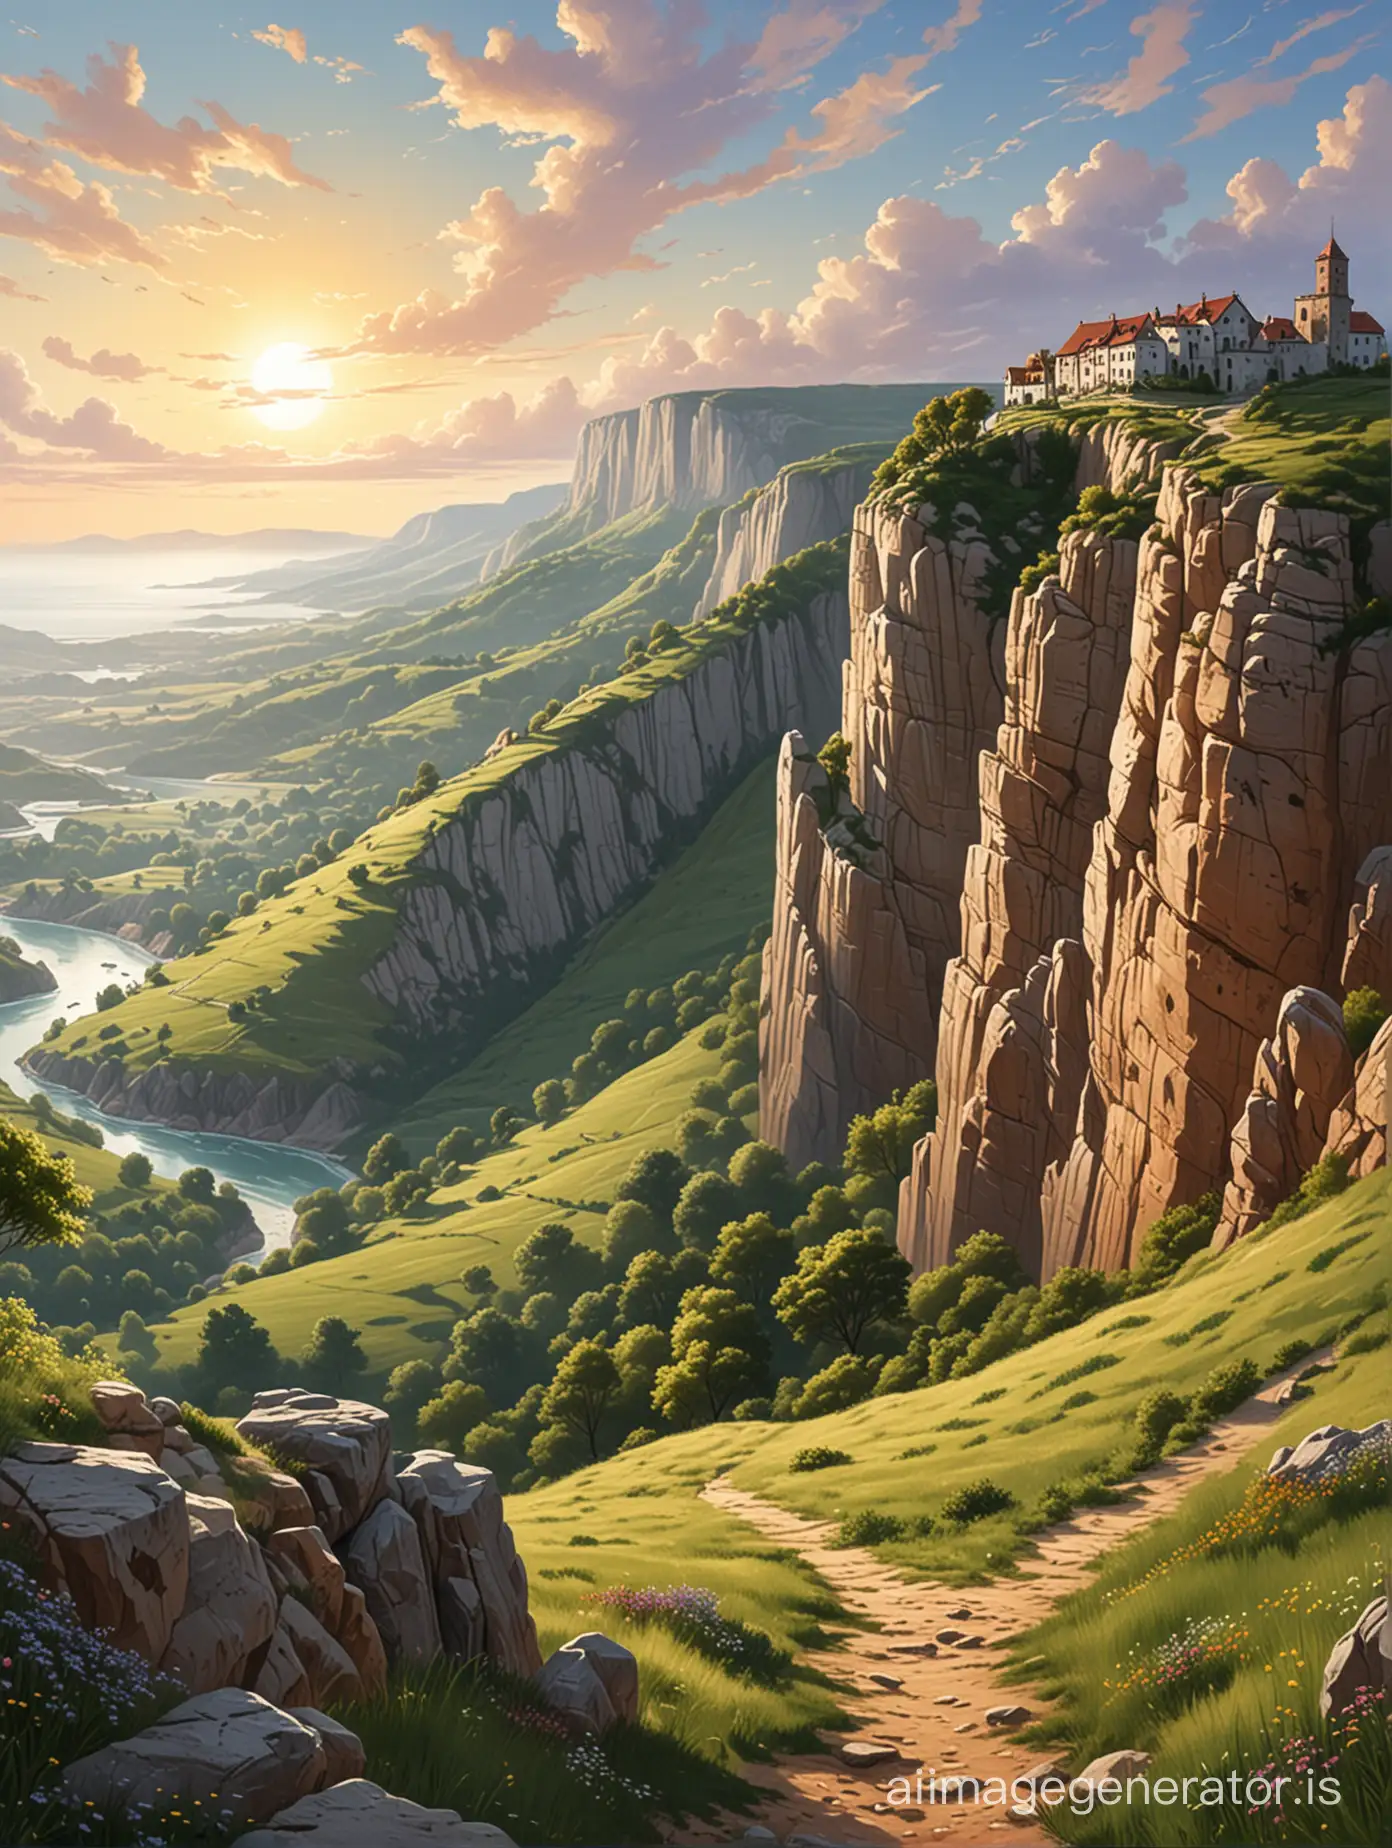 illustration for book cover.  For the background.  The view over the hill and the cliff